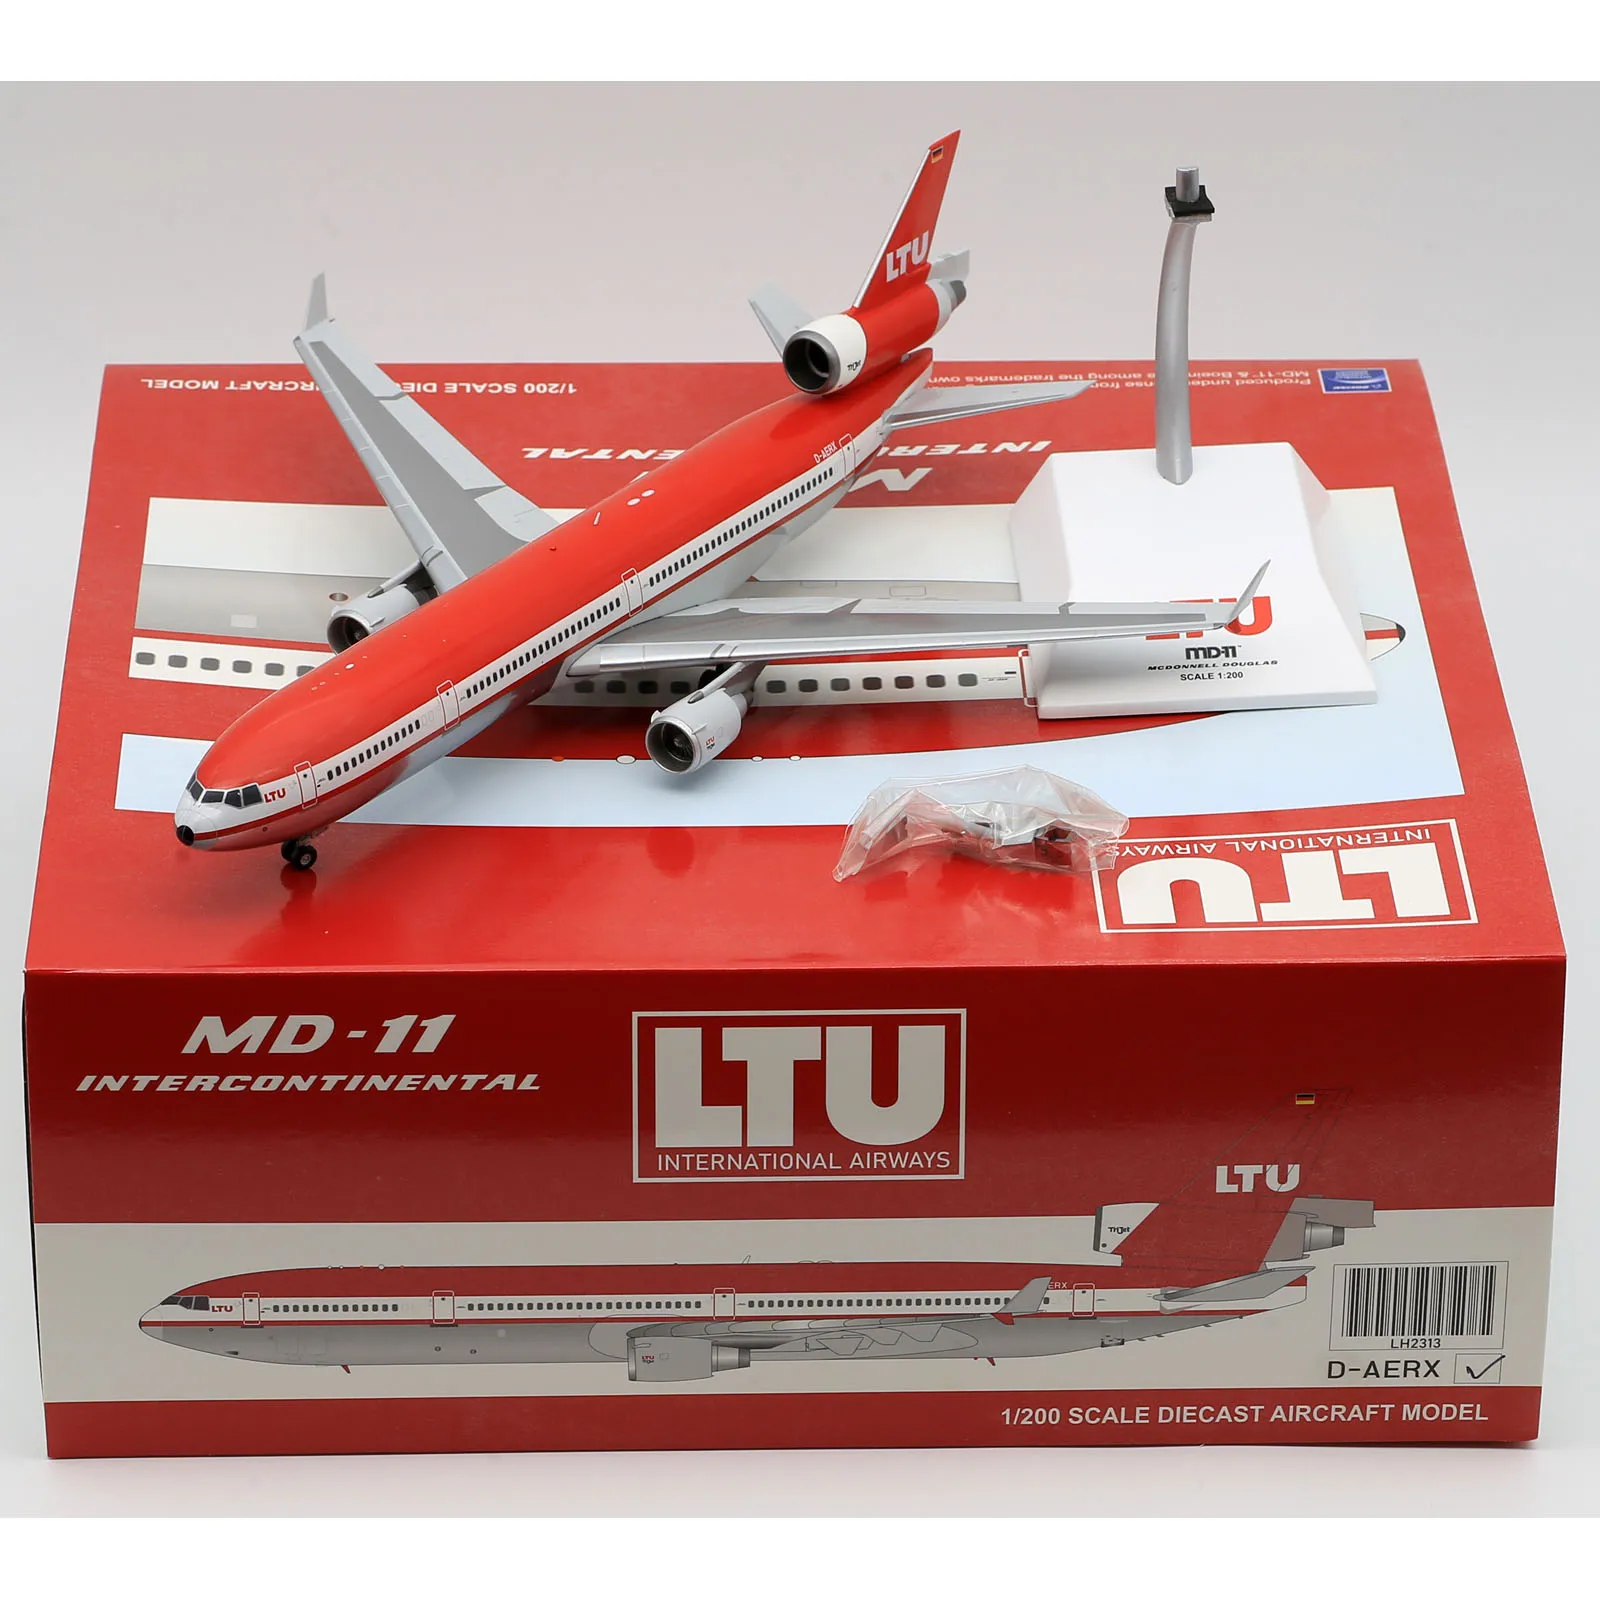 

LH2313 Alloy Collectible Plane Gift JC Wings 1:200 LTU Airlines MCDONNELL Douglas MD-11 Diecast Aircraft Jet Model D-AERX